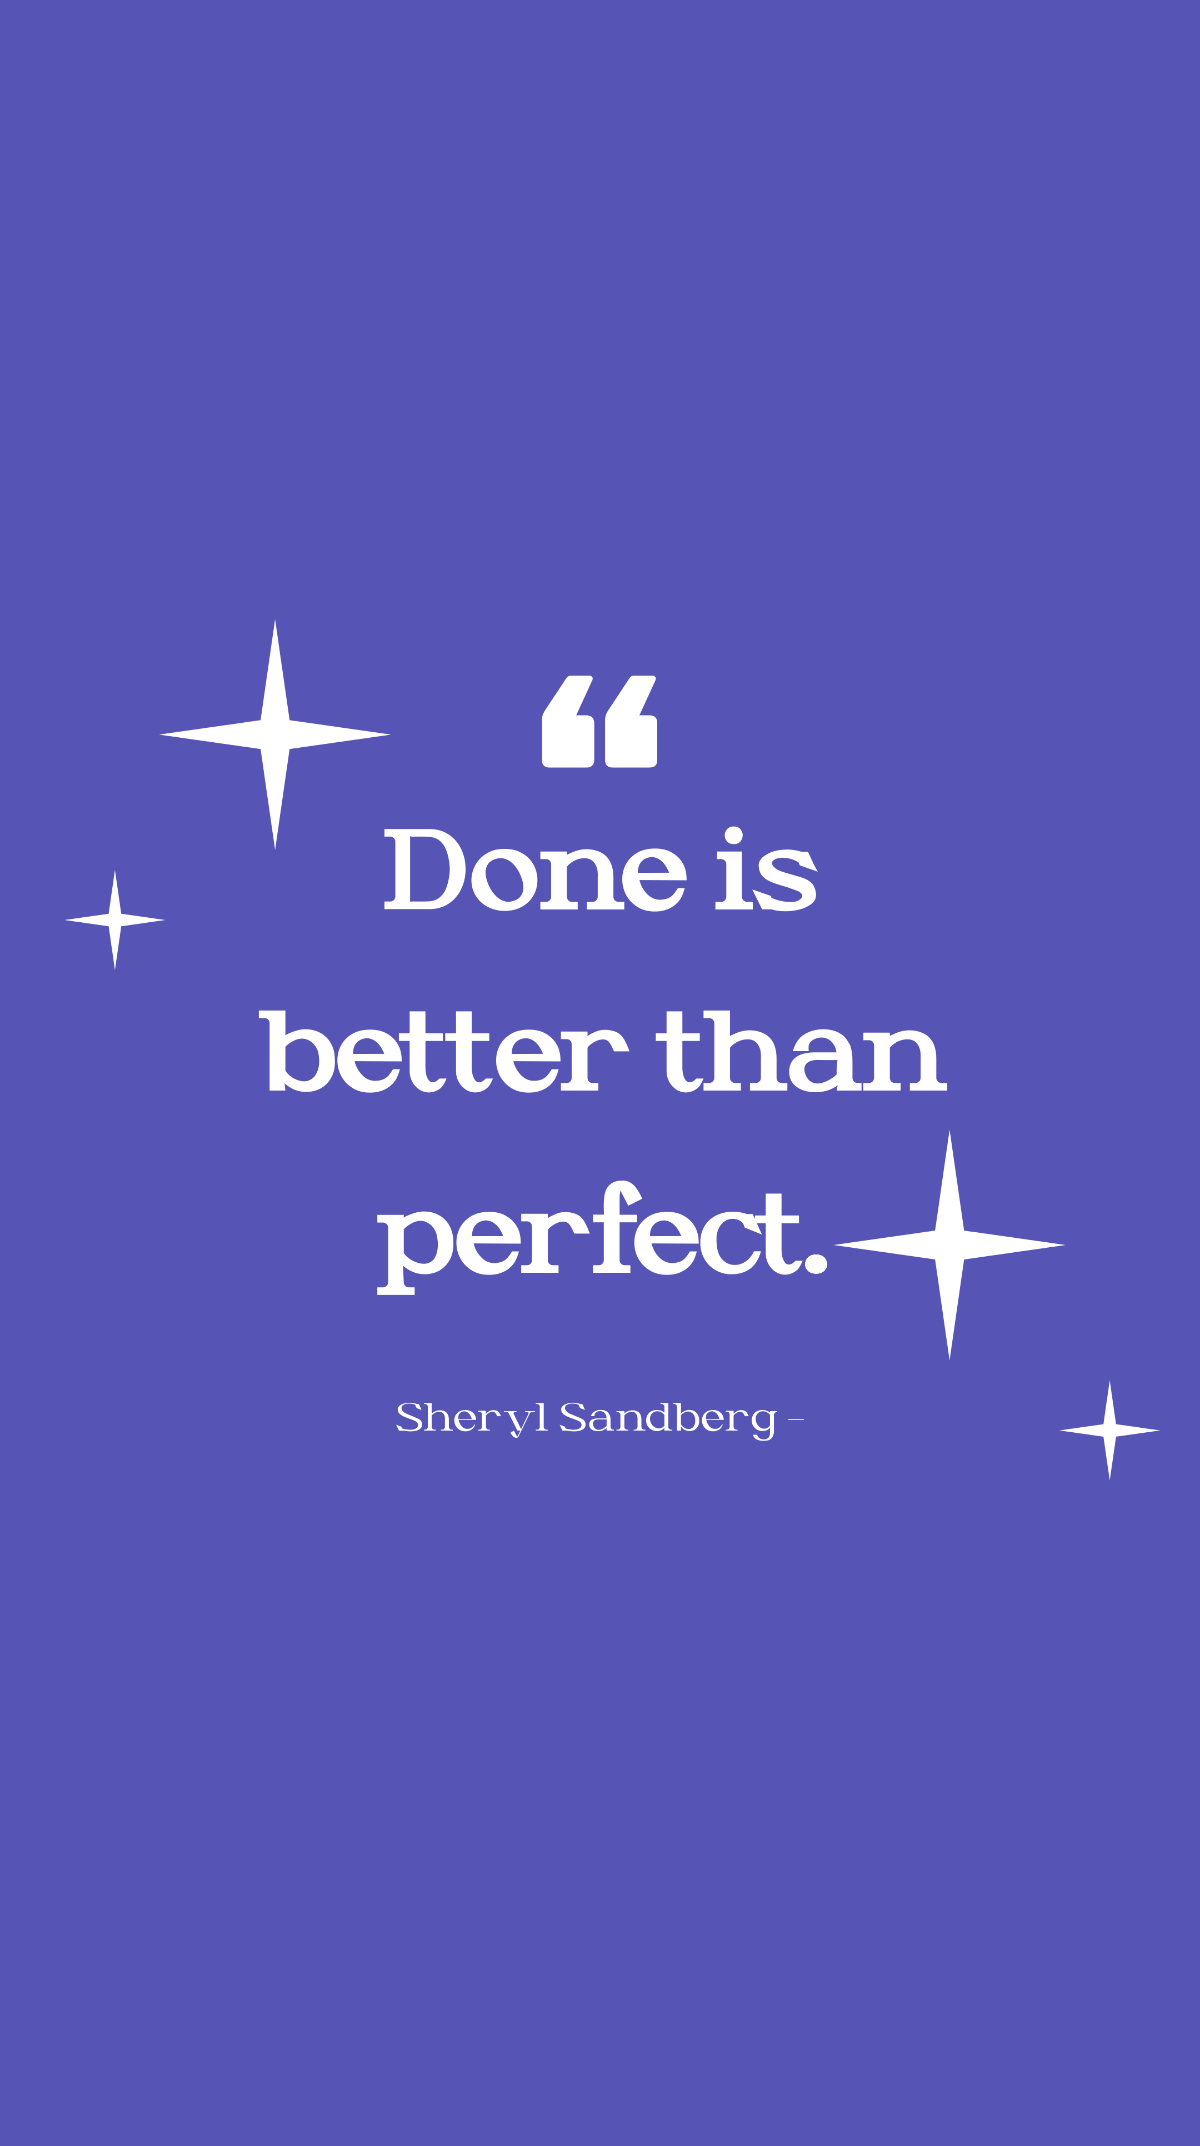 Sheryl Sandberg - Done is better than perfect. Template